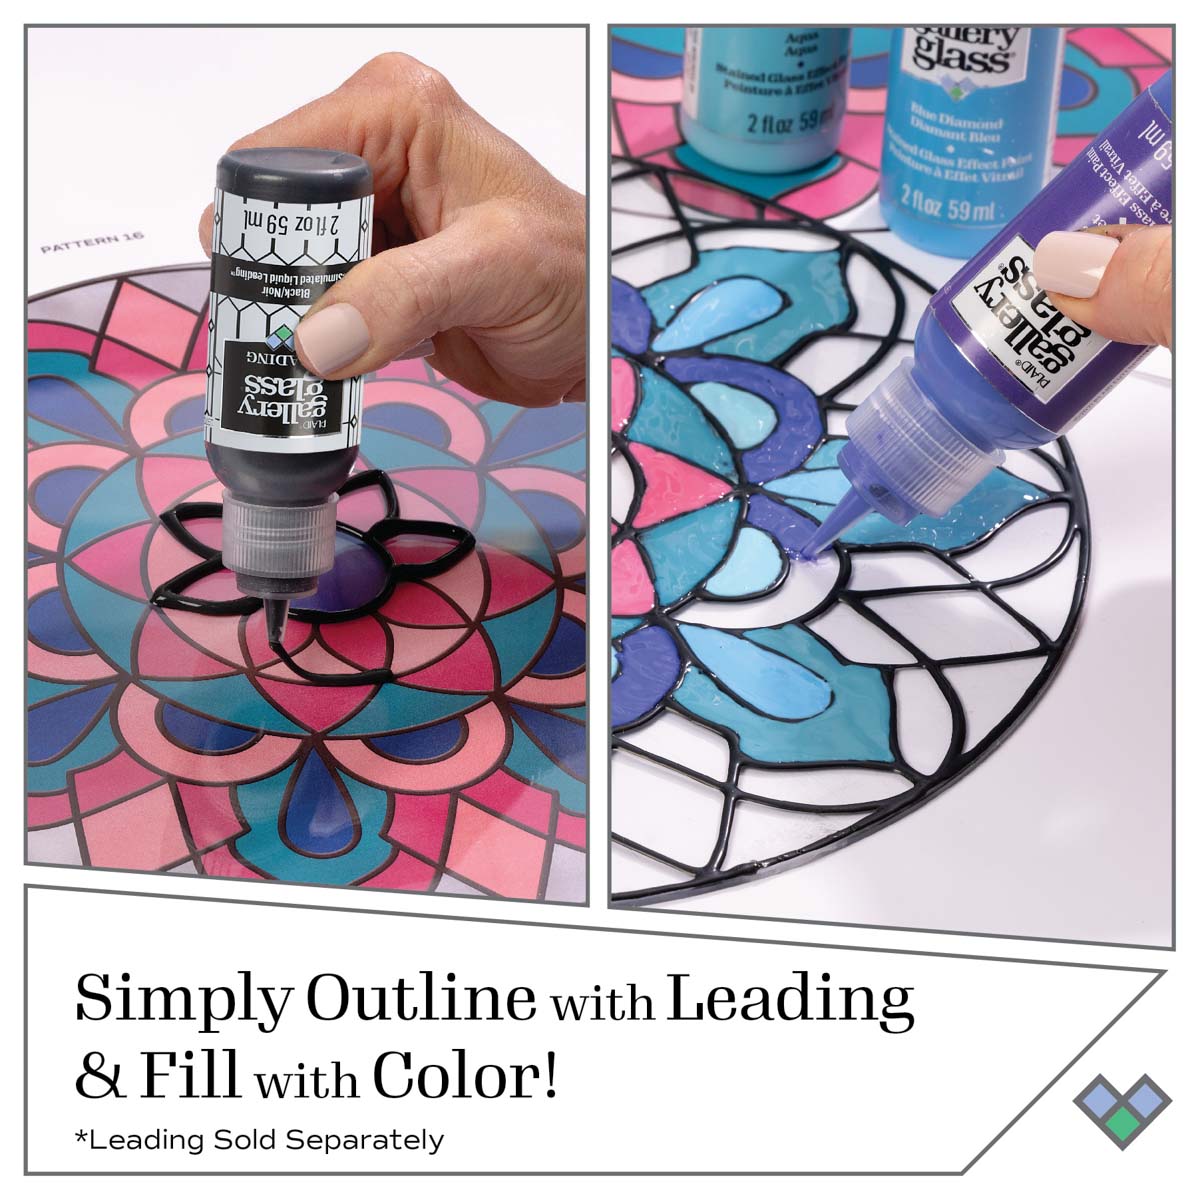 Gallery Glass ® Stained Glass Effect Paint - Holiday Berry, 2 oz. - 19696